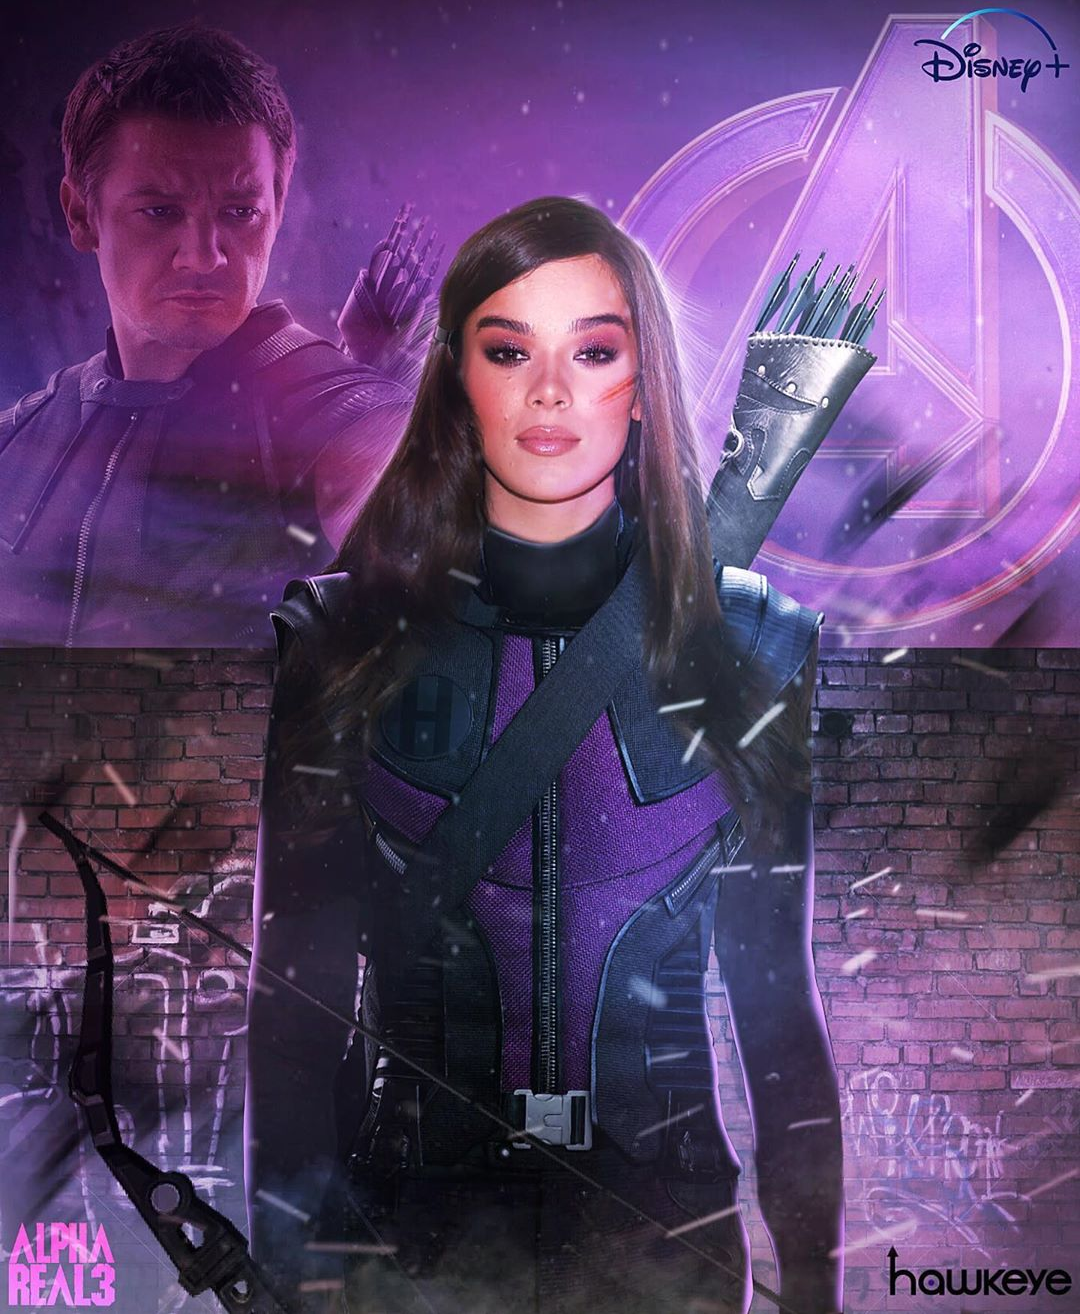 Hailee Steinfeld as Kate Bishop by alphareal3. Kate bishop hawkeye, Kate bishop, Hailee steinfeld